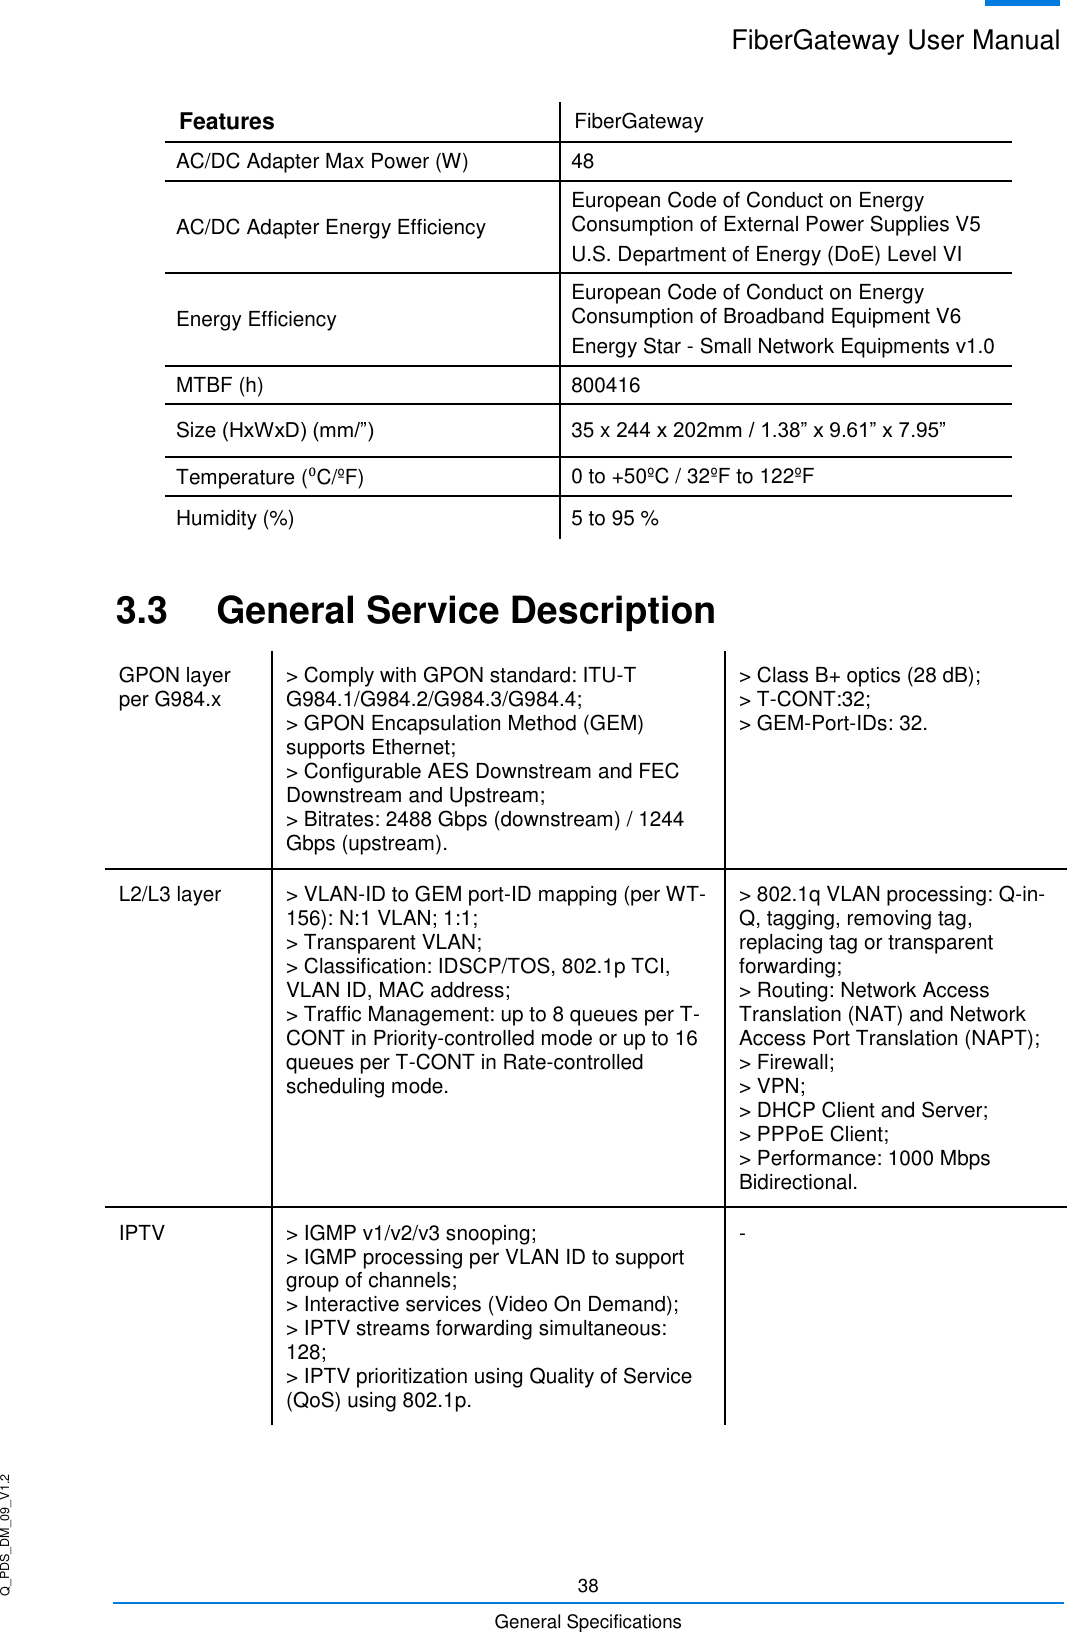 Q_PDS_DM_09_V1.2 FiberGateway User Manual  38 General Specifications Features FiberGateway AC/DC Adapter Max Power (W) 48 AC/DC Adapter Energy Efficiency European Code of Conduct on Energy Consumption of External Power Supplies V5 U.S. Department of Energy (DoE) Level VI Energy Efficiency European Code of Conduct on Energy Consumption of Broadband Equipment V6 Energy Star - Small Network Equipments v1.0 MTBF (h) 800416 Size (HxWxD) (mm/”) 35 x 244 x 202mm / 1.38” x 9.61” x 7.95” Temperature (⁰C/ºF) 0 to +50ºC / 32ºF to 122ºF Humidity (%) 5 to 95 % 3.3  General Service Description GPON layer per G984.x &gt; Comply with GPON standard: ITU-T G984.1/G984.2/G984.3/G984.4; &gt; GPON Encapsulation Method (GEM) supports Ethernet; &gt; Configurable AES Downstream and FEC Downstream and Upstream; &gt; Bitrates: 2488 Gbps (downstream) / 1244 Gbps (upstream). &gt; Class B+ optics (28 dB); &gt; T-CONT:32; &gt; GEM-Port-IDs: 32. L2/L3 layer &gt; VLAN-ID to GEM port-ID mapping (per WT-156): N:1 VLAN; 1:1; &gt; Transparent VLAN; &gt; Classification: IDSCP/TOS, 802.1p TCI, VLAN ID, MAC address; &gt; Traffic Management: up to 8 queues per T-CONT in Priority-controlled mode or up to 16 queues per T-CONT in Rate-controlled scheduling mode. &gt; 802.1q VLAN processing: Q-in-Q, tagging, removing tag, replacing tag or transparent forwarding; &gt; Routing: Network Access Translation (NAT) and Network Access Port Translation (NAPT); &gt; Firewall; &gt; VPN; &gt; DHCP Client and Server; &gt; PPPoE Client; &gt; Performance: 1000 Mbps Bidirectional. IPTV &gt; IGMP v1/v2/v3 snooping; &gt; IGMP processing per VLAN ID to support group of channels; &gt; Interactive services (Video On Demand); &gt; IPTV streams forwarding simultaneous: 128; &gt; IPTV prioritization using Quality of Service (QoS) using 802.1p. - 